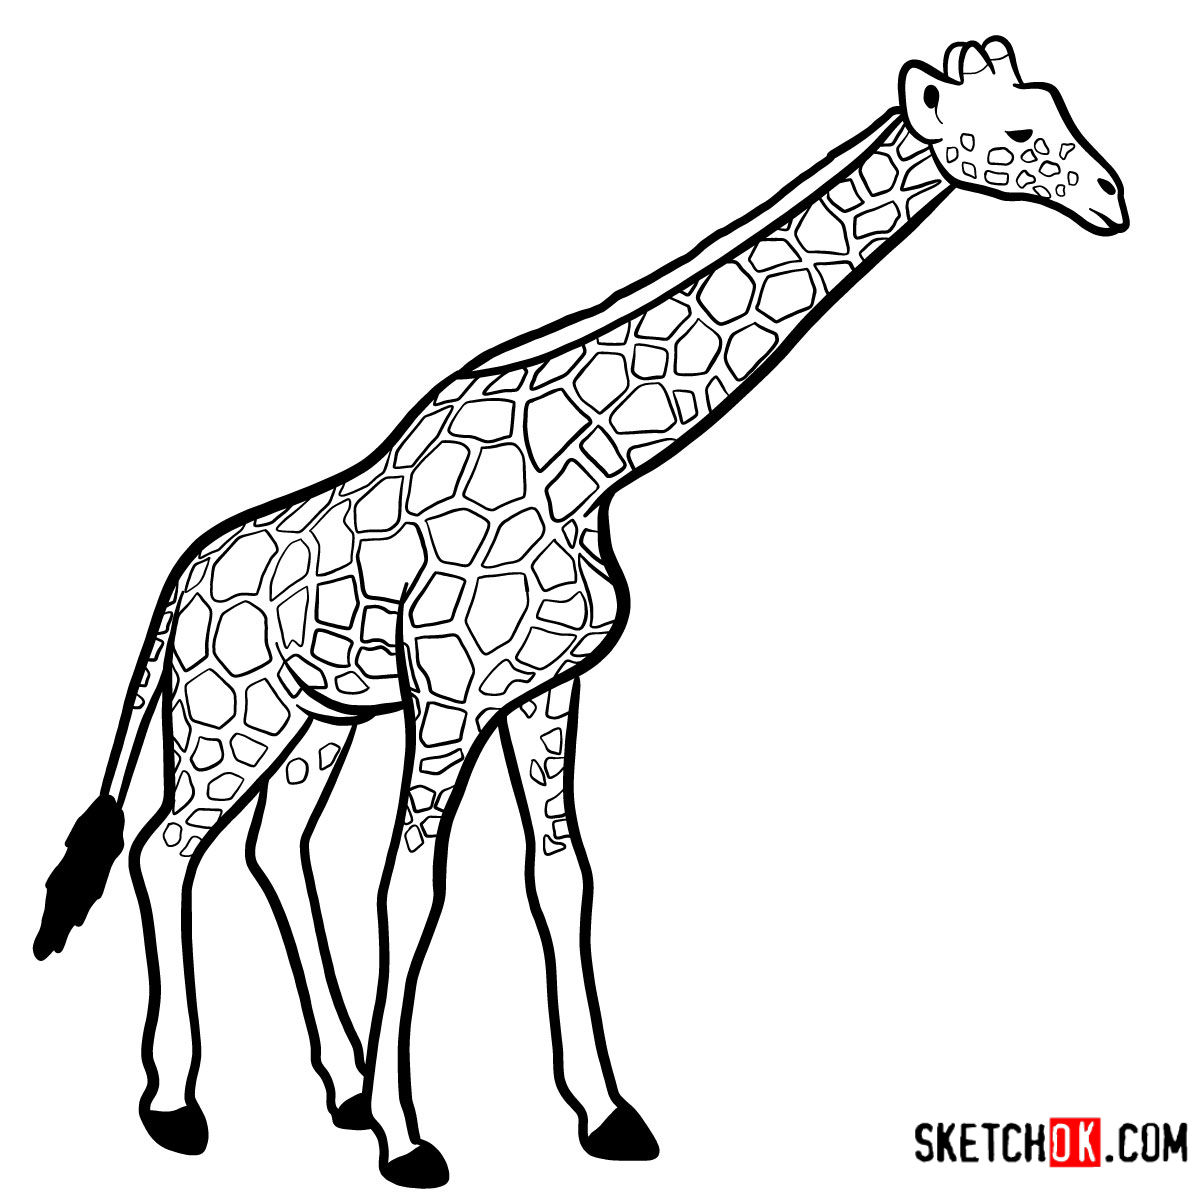 How to draw a Giraffe in full growth